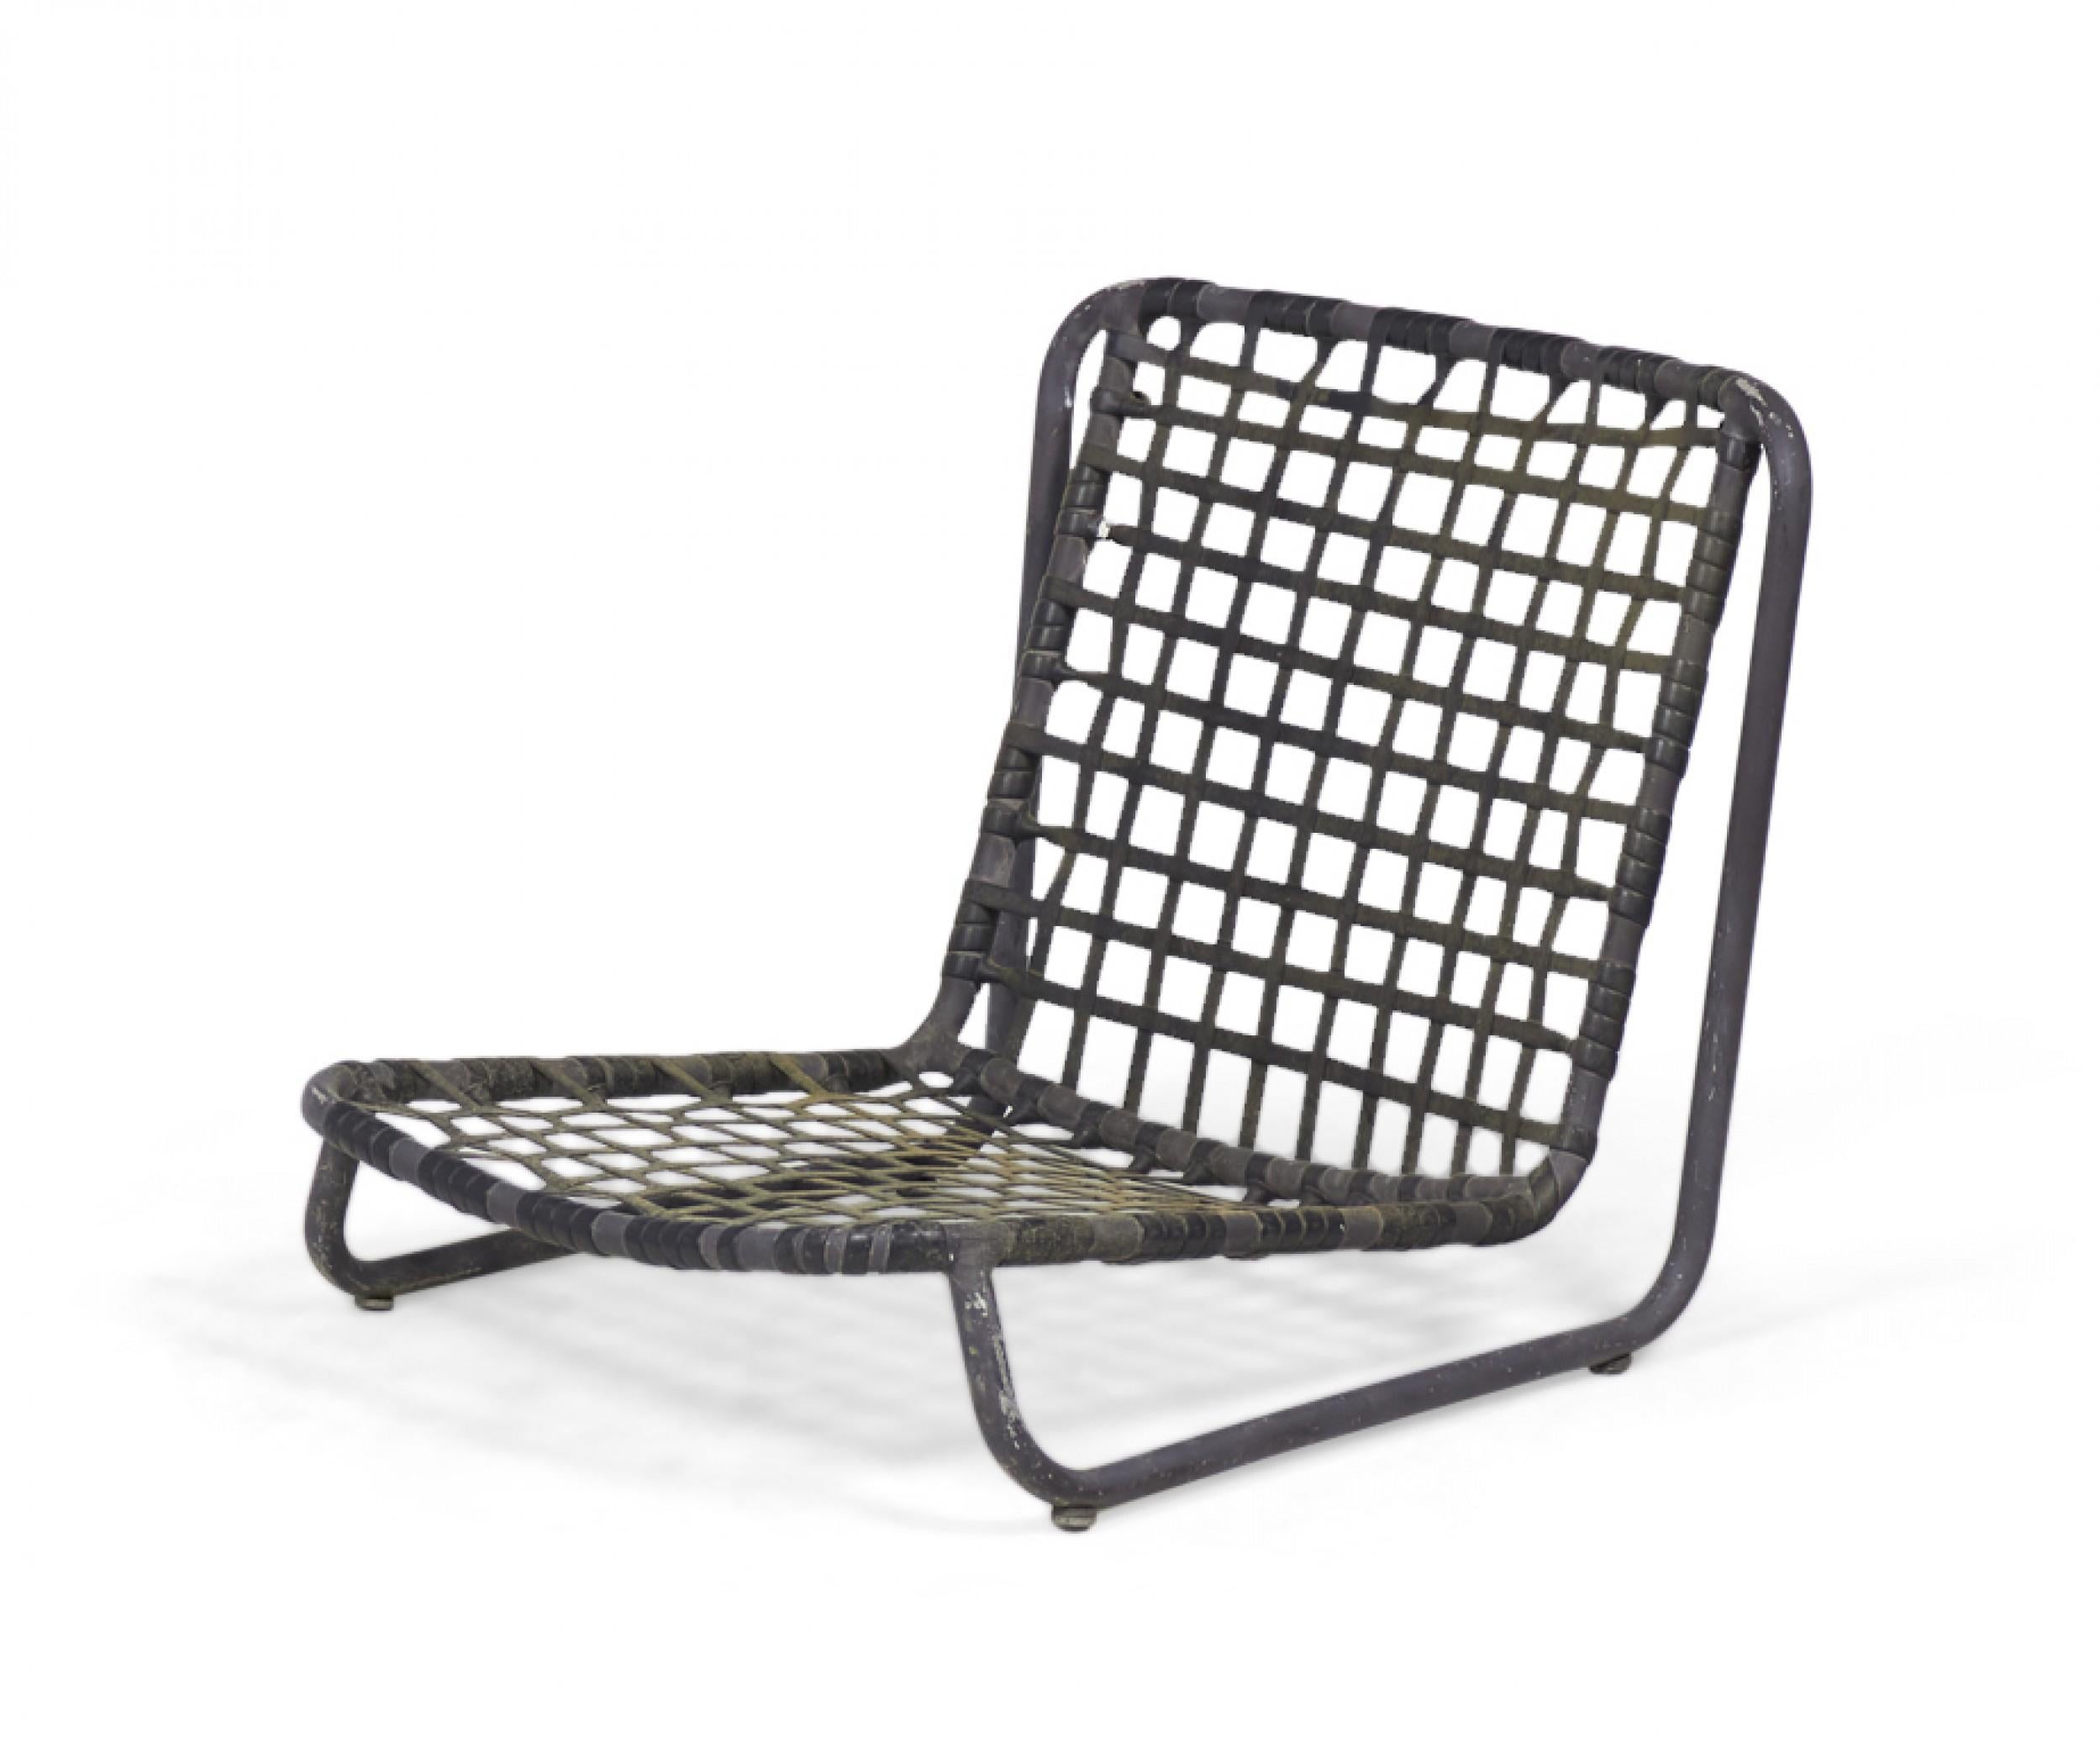 Pair of American mid-century outdoor aluminum beach / sand chairs with latticed backs and seats in an aluminum frame that sits low to the ground. (BROWN JORDAN)(PRICED AS PAIR)